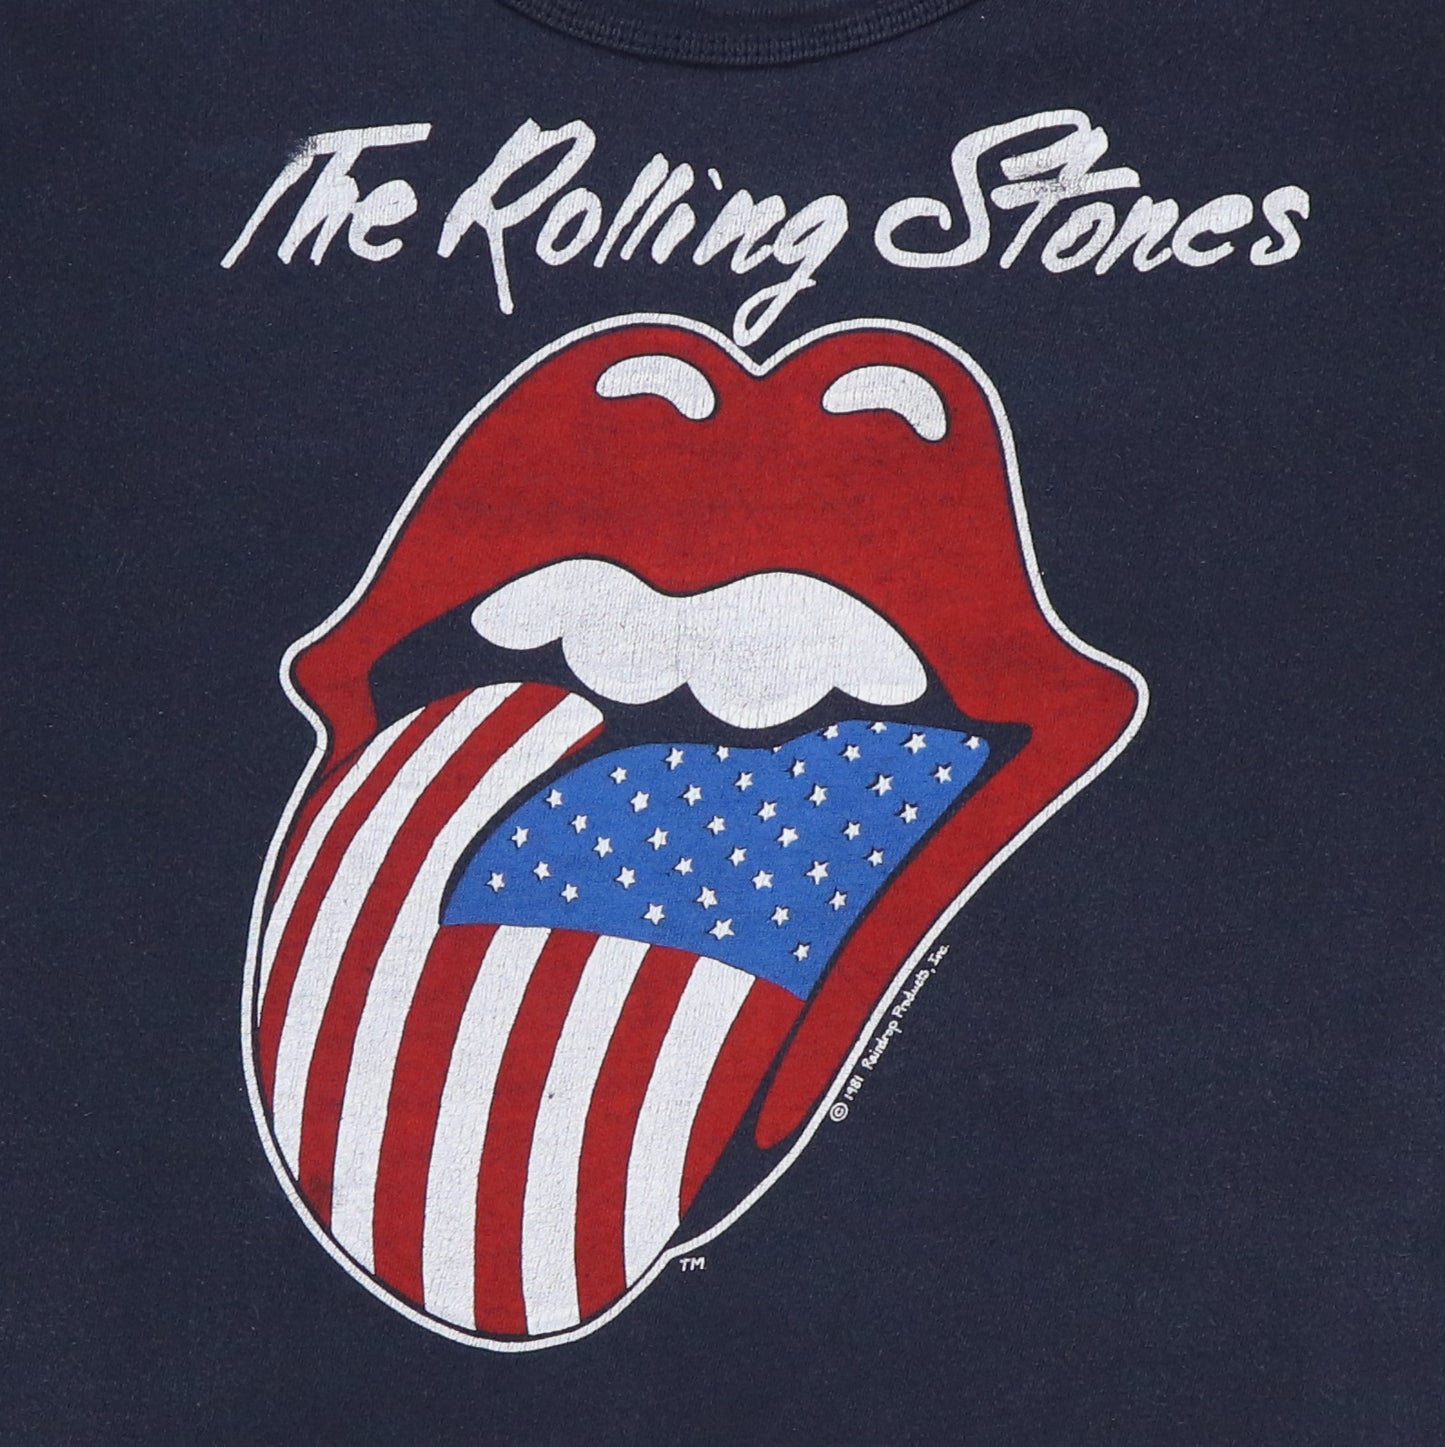 1981 Rolling Stones North American Tour Shirt